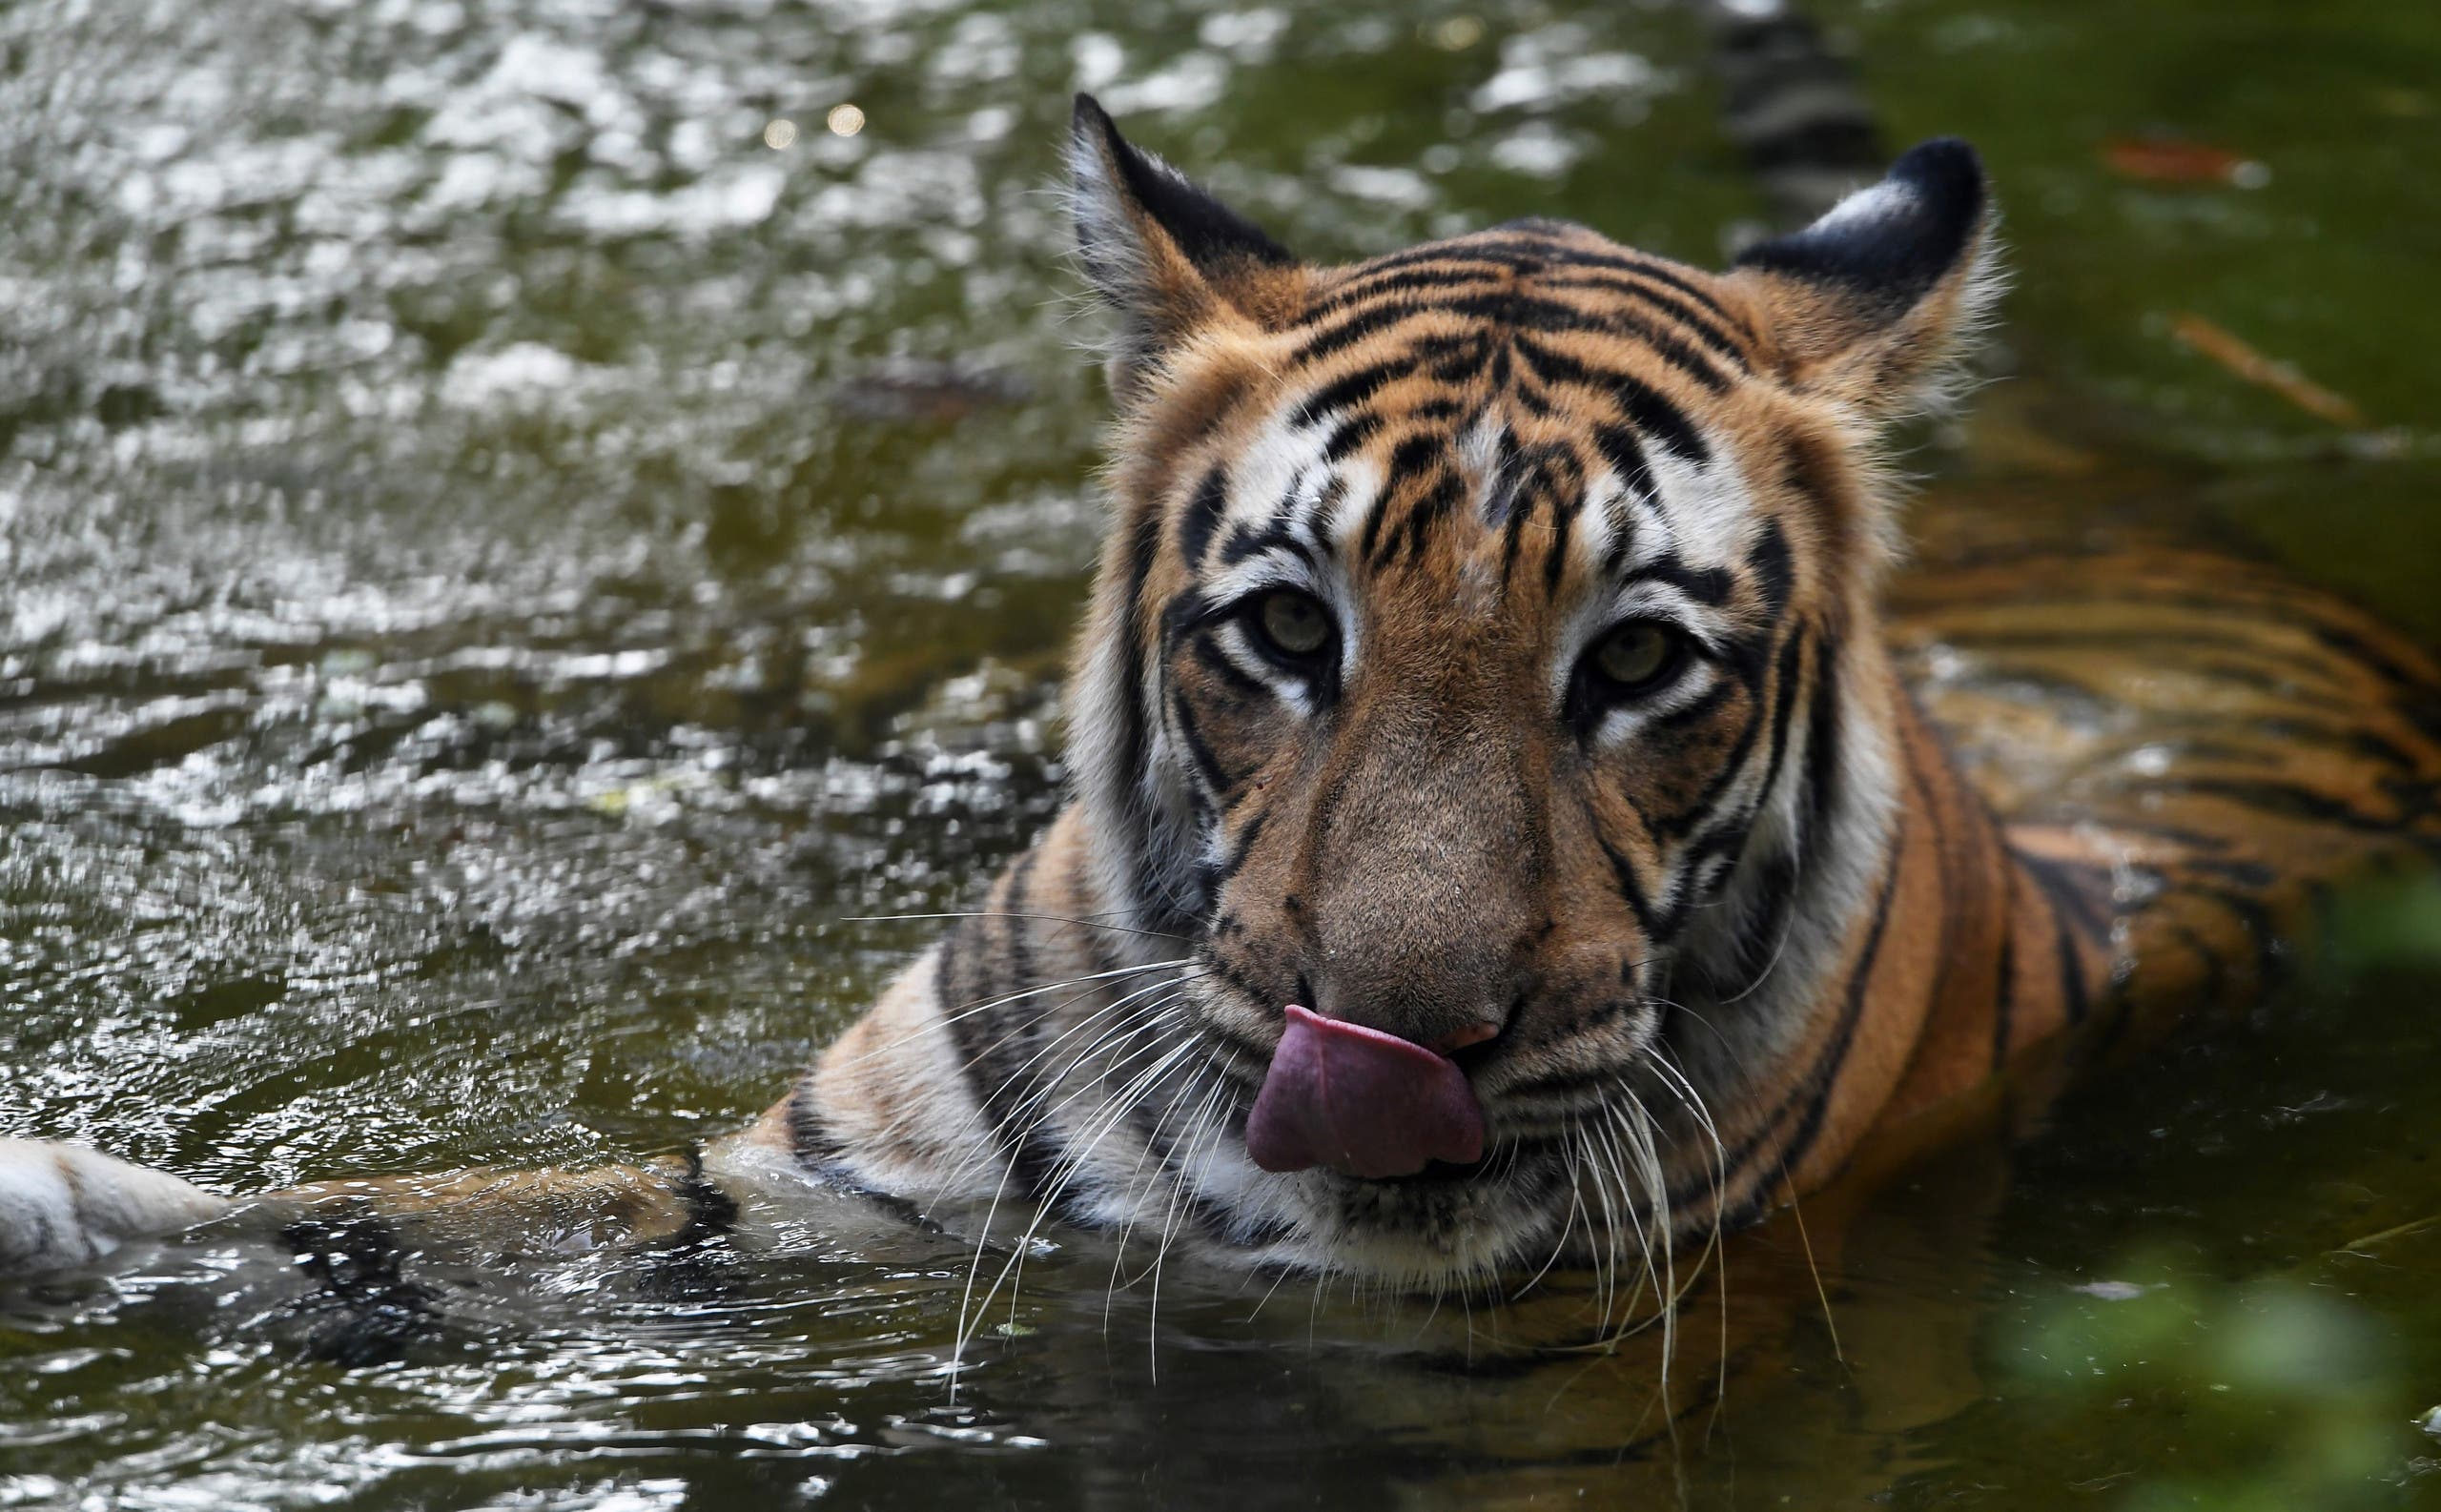 An Indian tiger rests in a pool of water. (File photo: AFP)